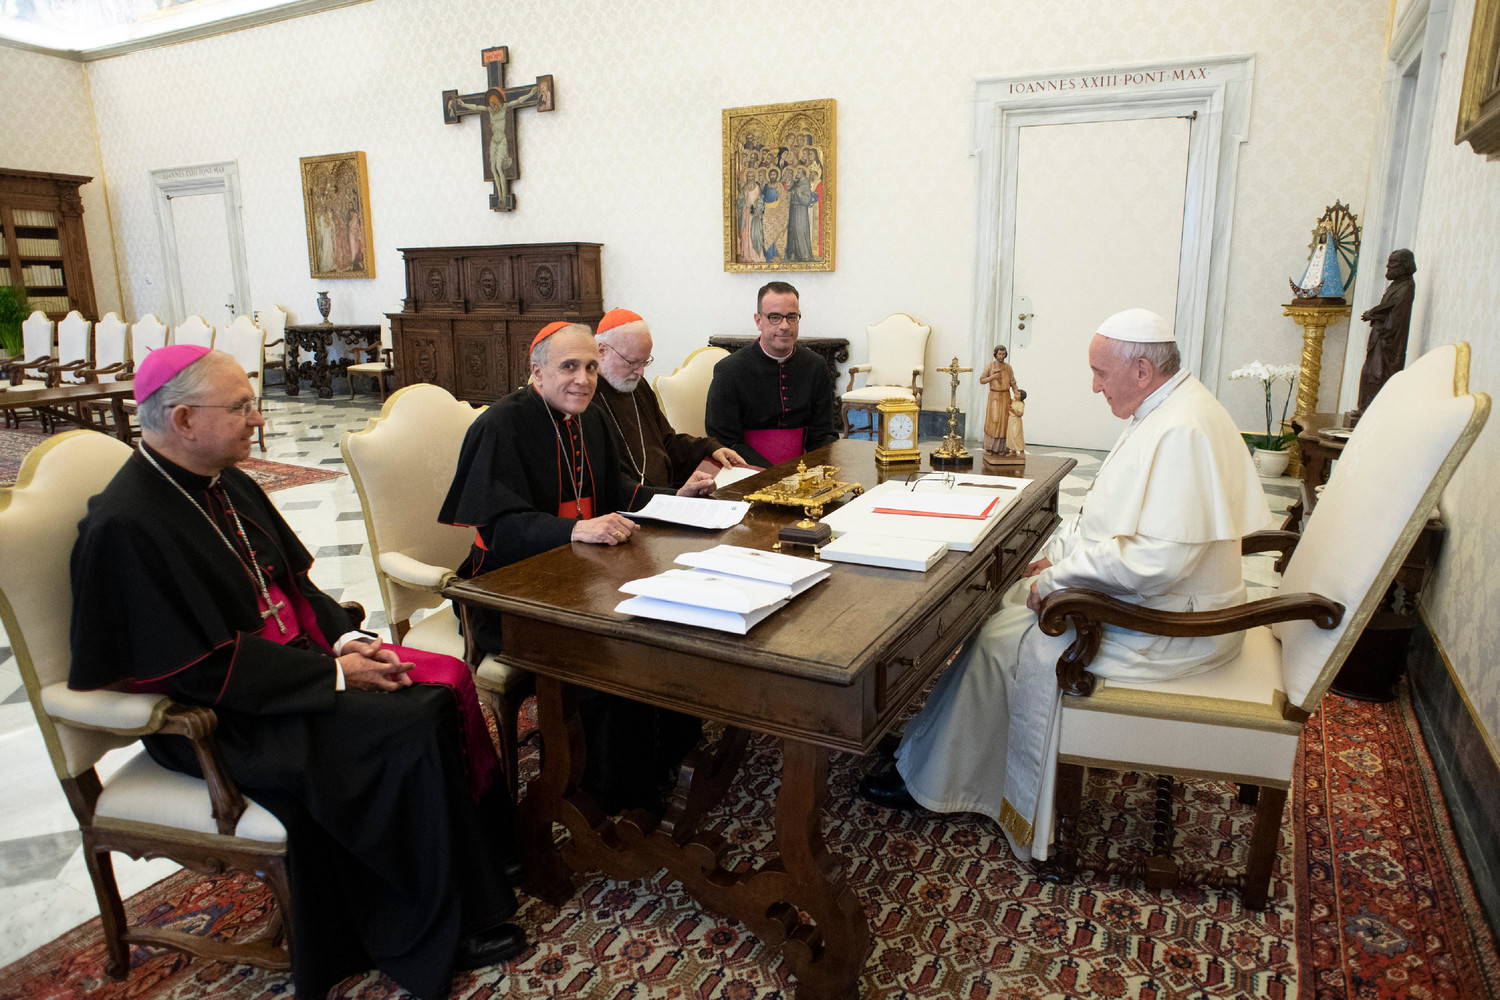 Pope Francis meets with officials representing the U.S. Conference of Catholic Bishops at the Vatican Sept. 13. Pictured from left are Archbishop Jose H. Gomez of Los Angeles, vice president of the conference, Cardinal Daniel N. DiNardo of Galveston-Houston, president of conference, Cardinal Sean P. O’Malley of Boston, president of the Pontifical Commission for the Protection of Minors, and Msgr. J. Brian Bransfield, general secretary of the conference.